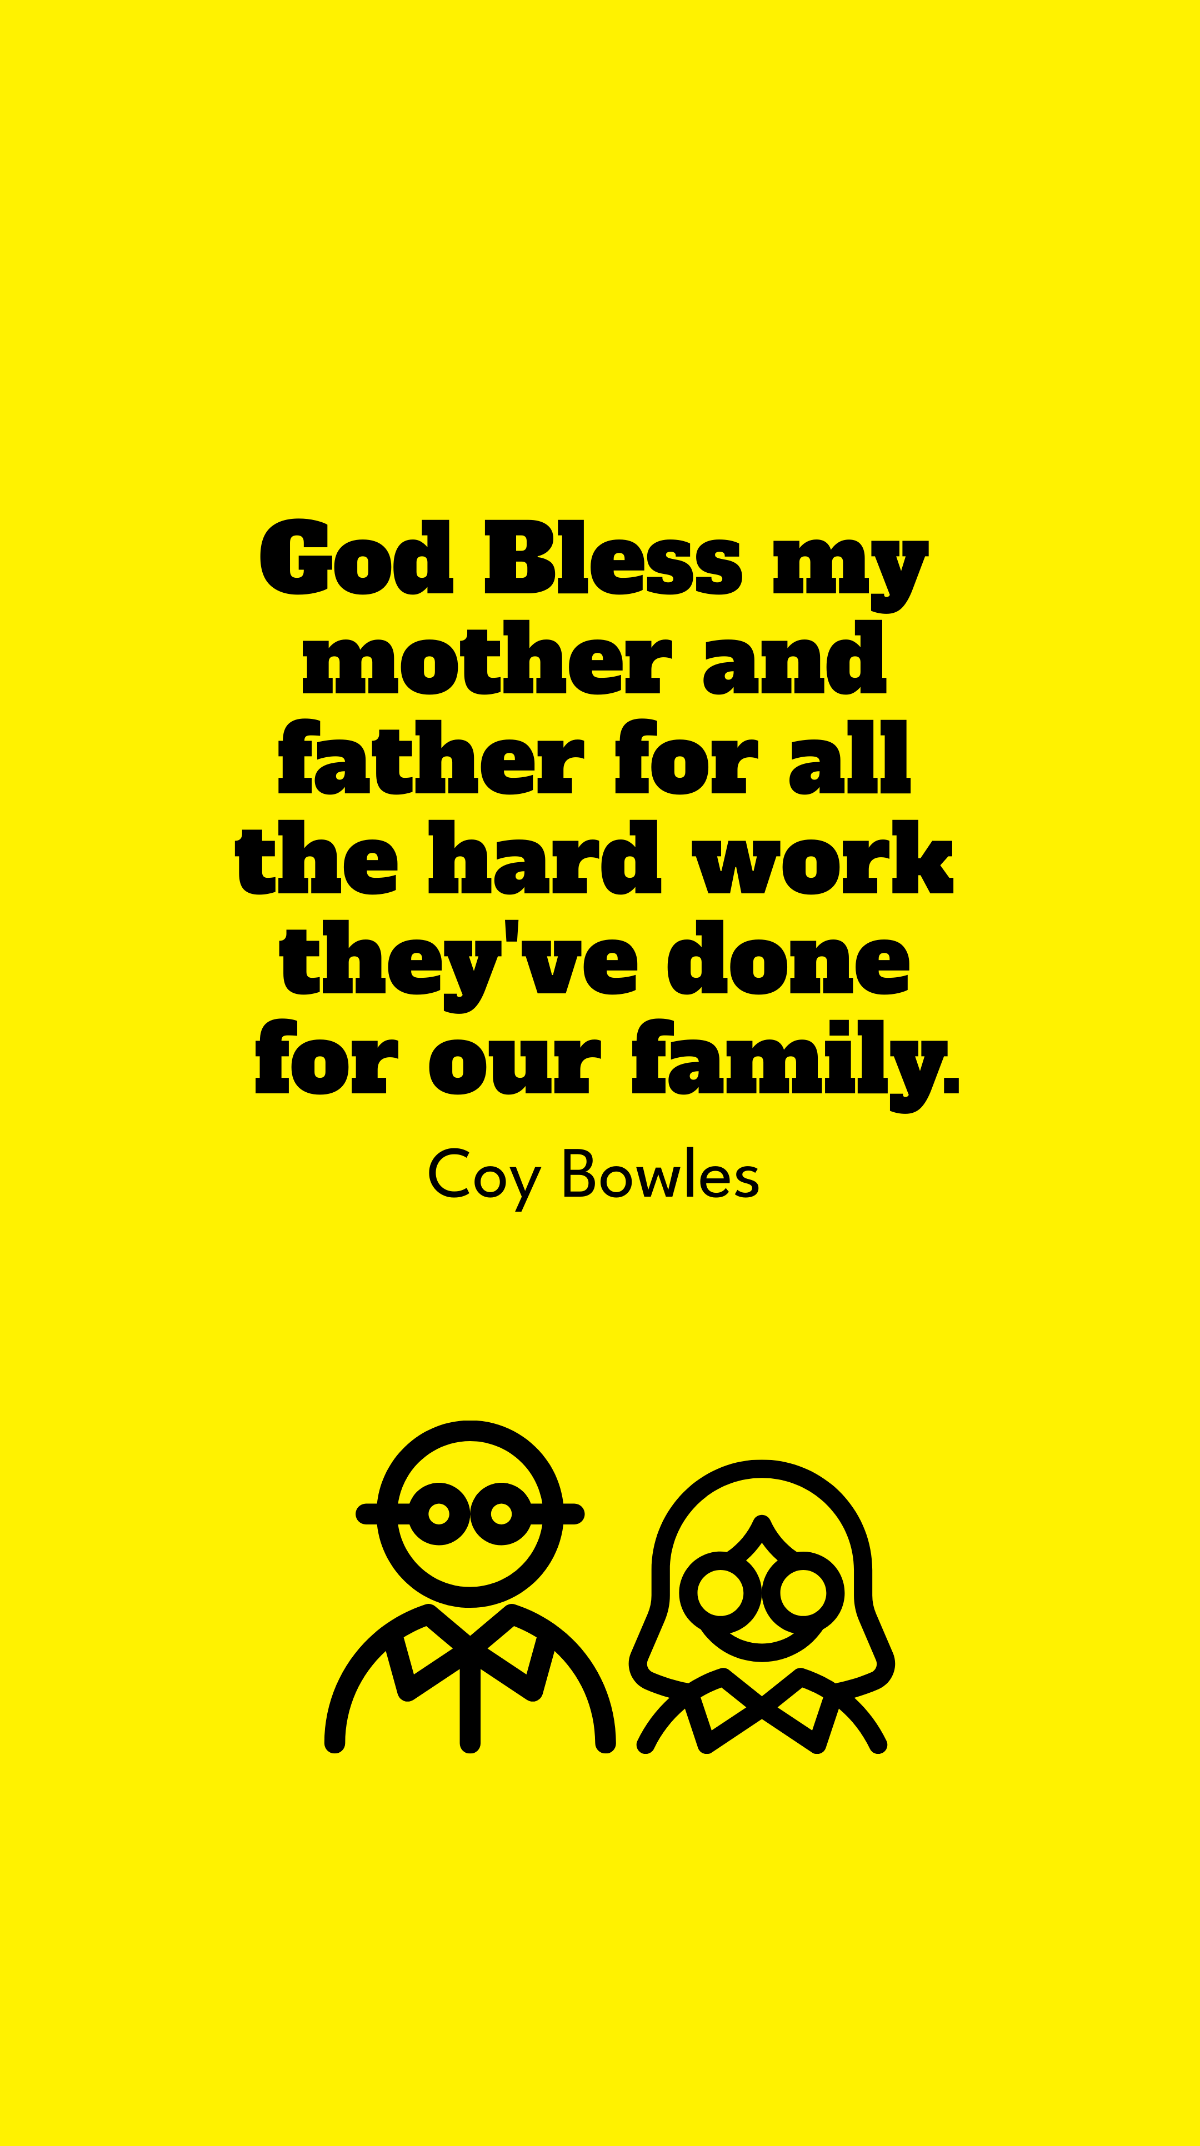 Coy Bowles - God Bless my mother and father for all the hard work they've done for our family.